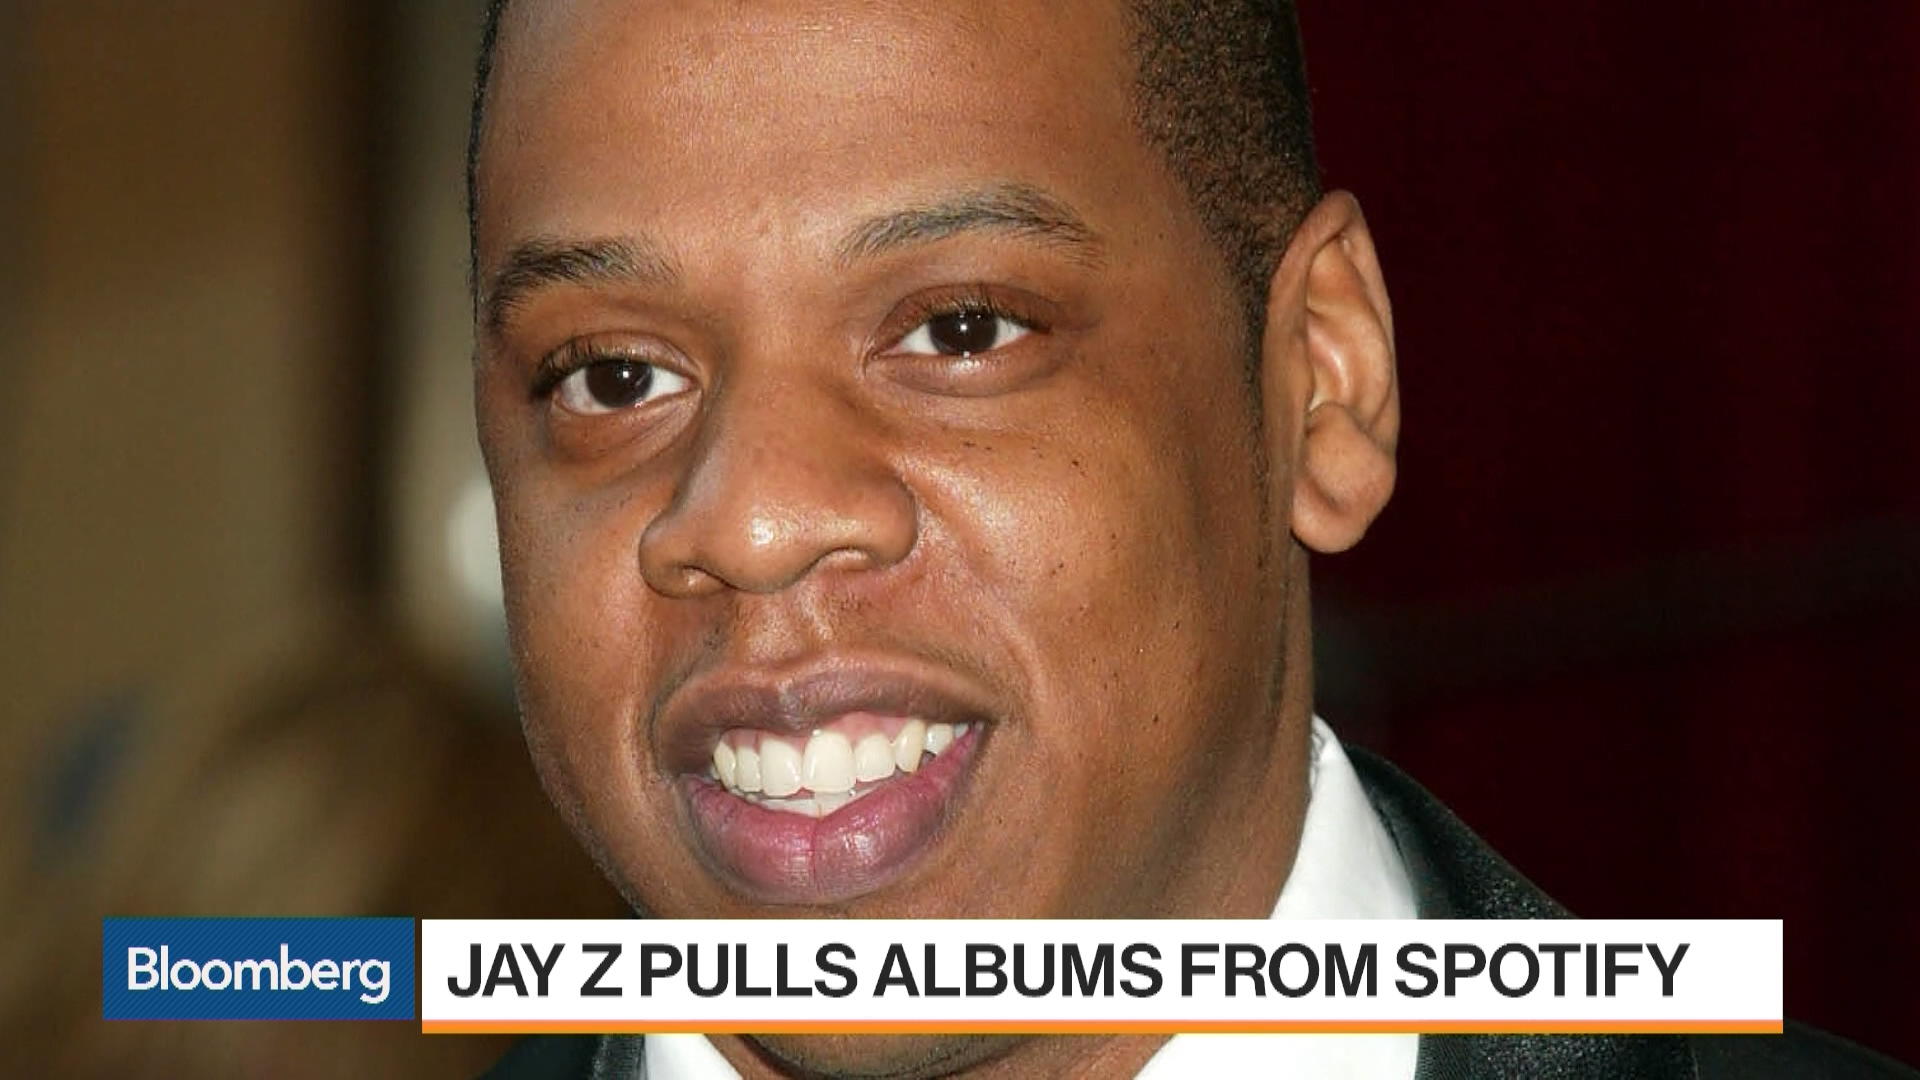 why arent jay z albums on spotify